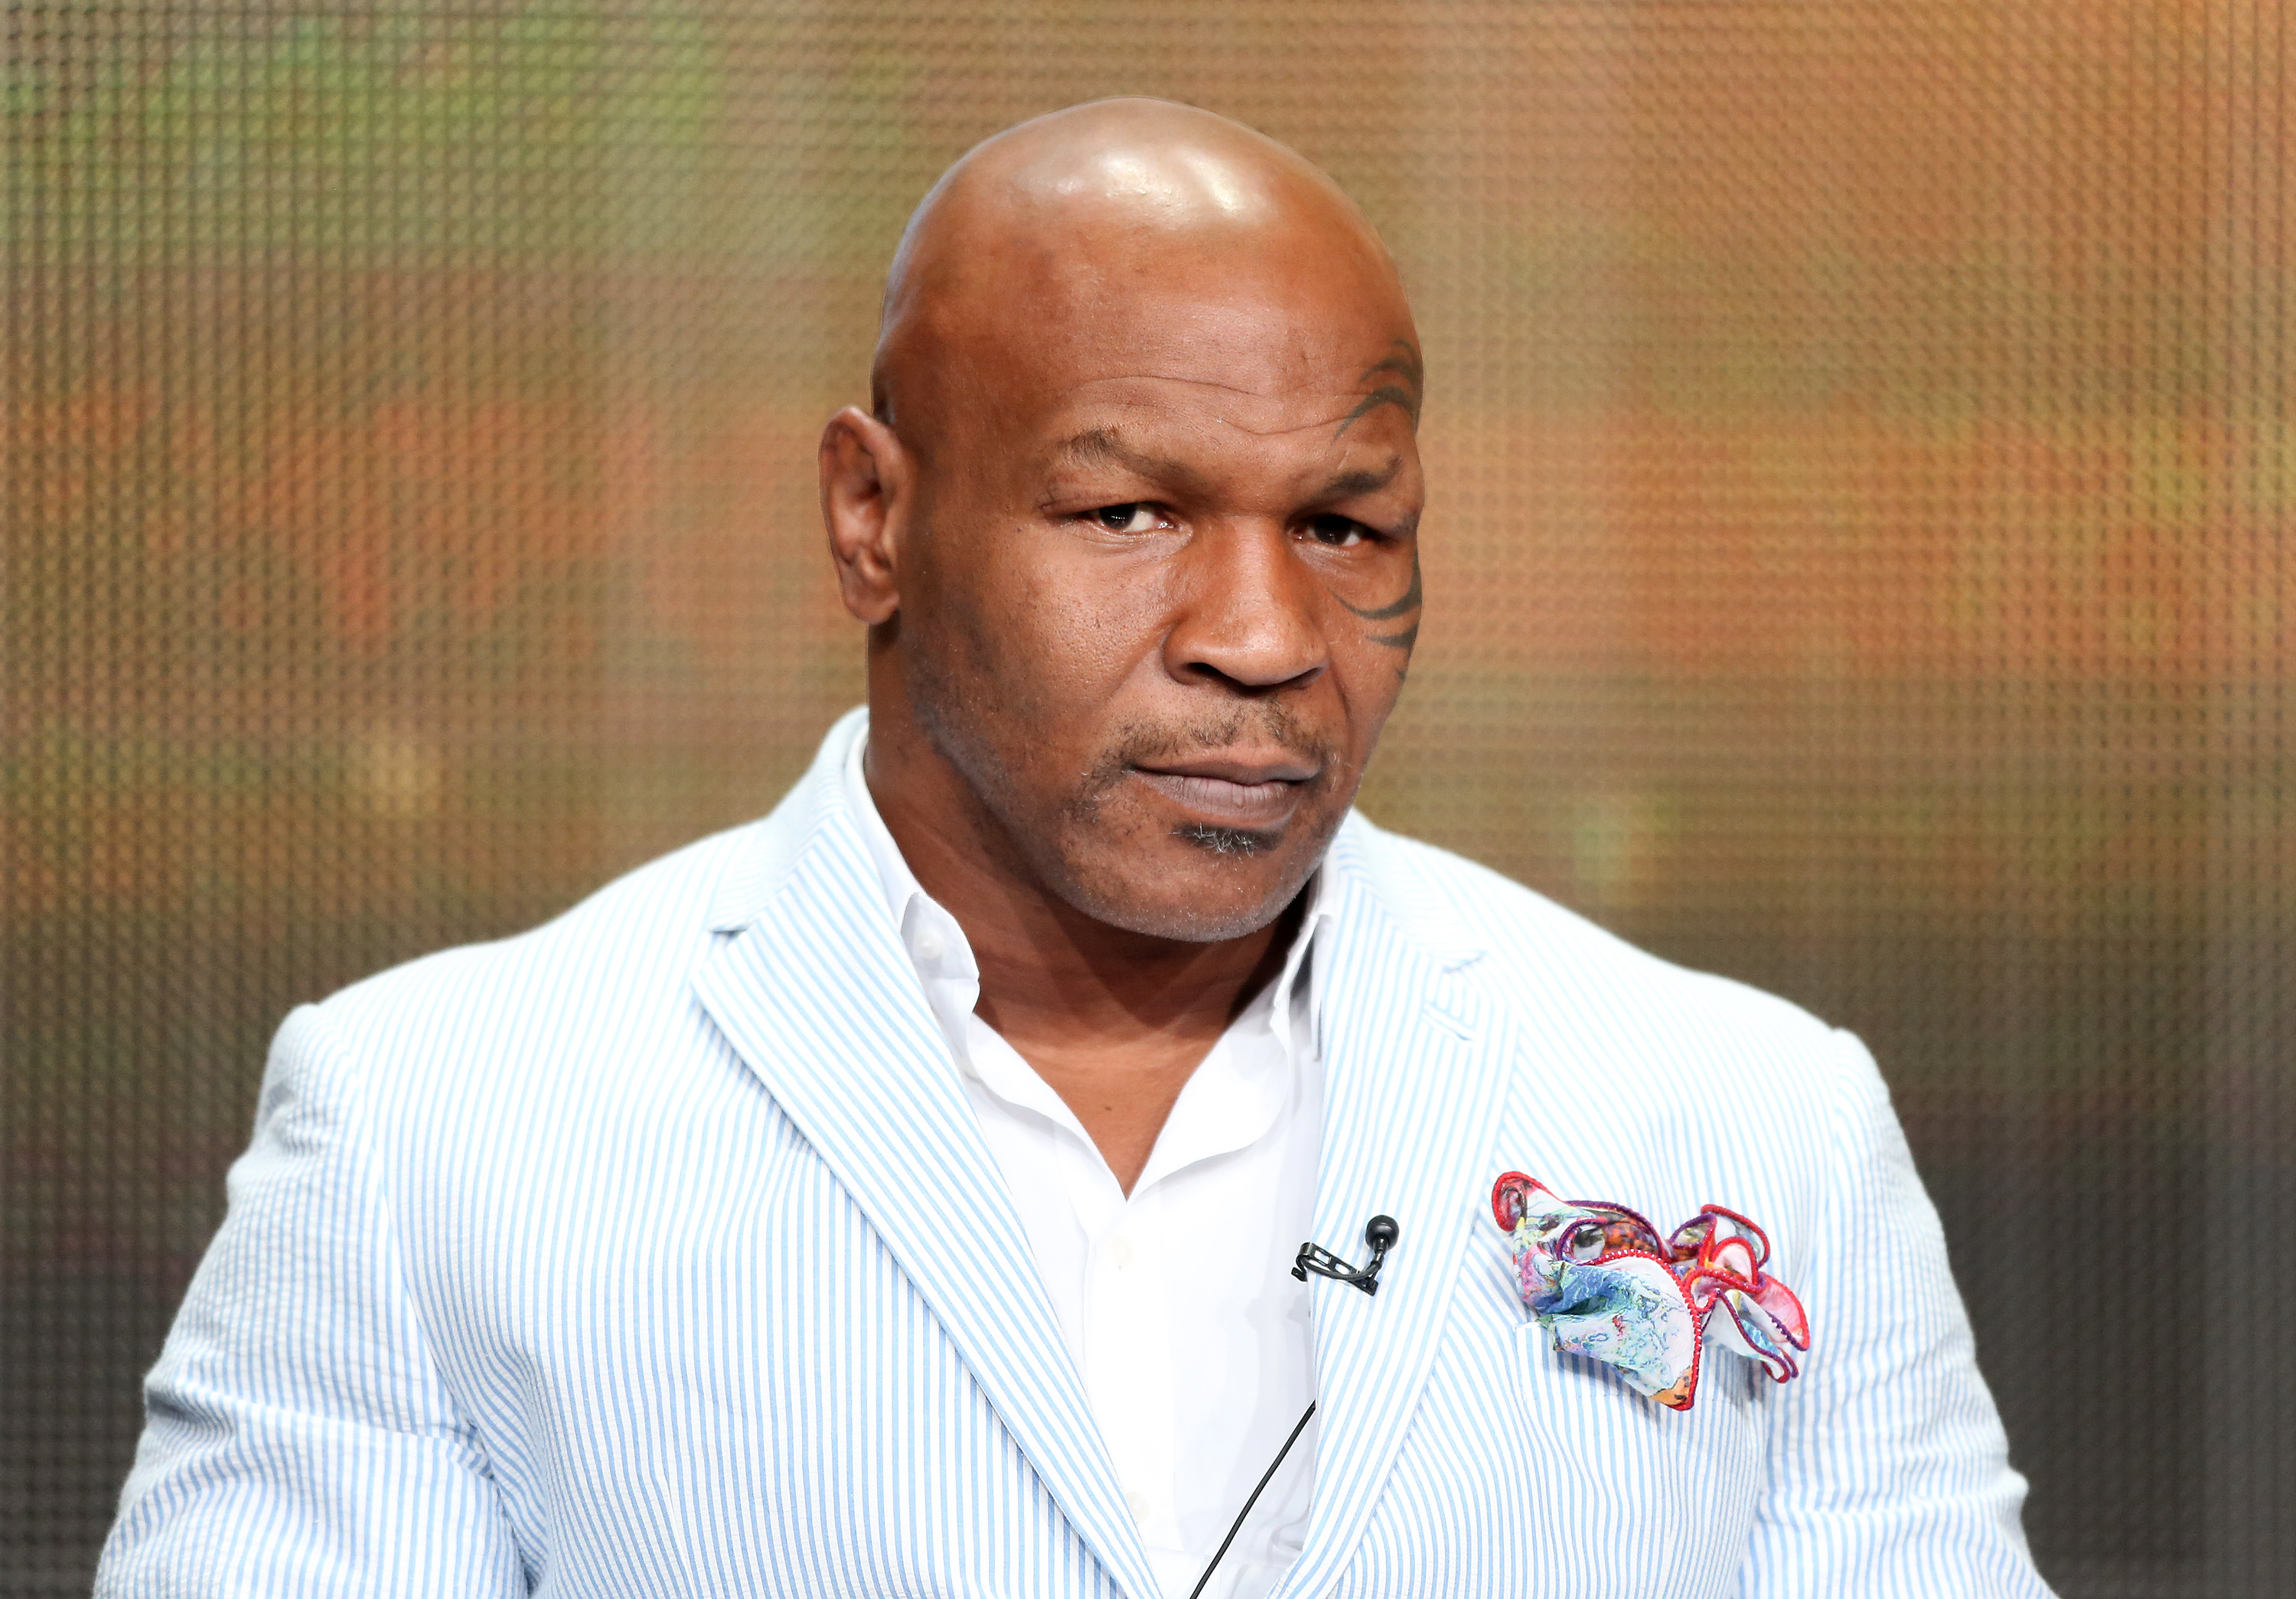 Mike Tyson The Knockout How to watch, live stream, TV channel, time